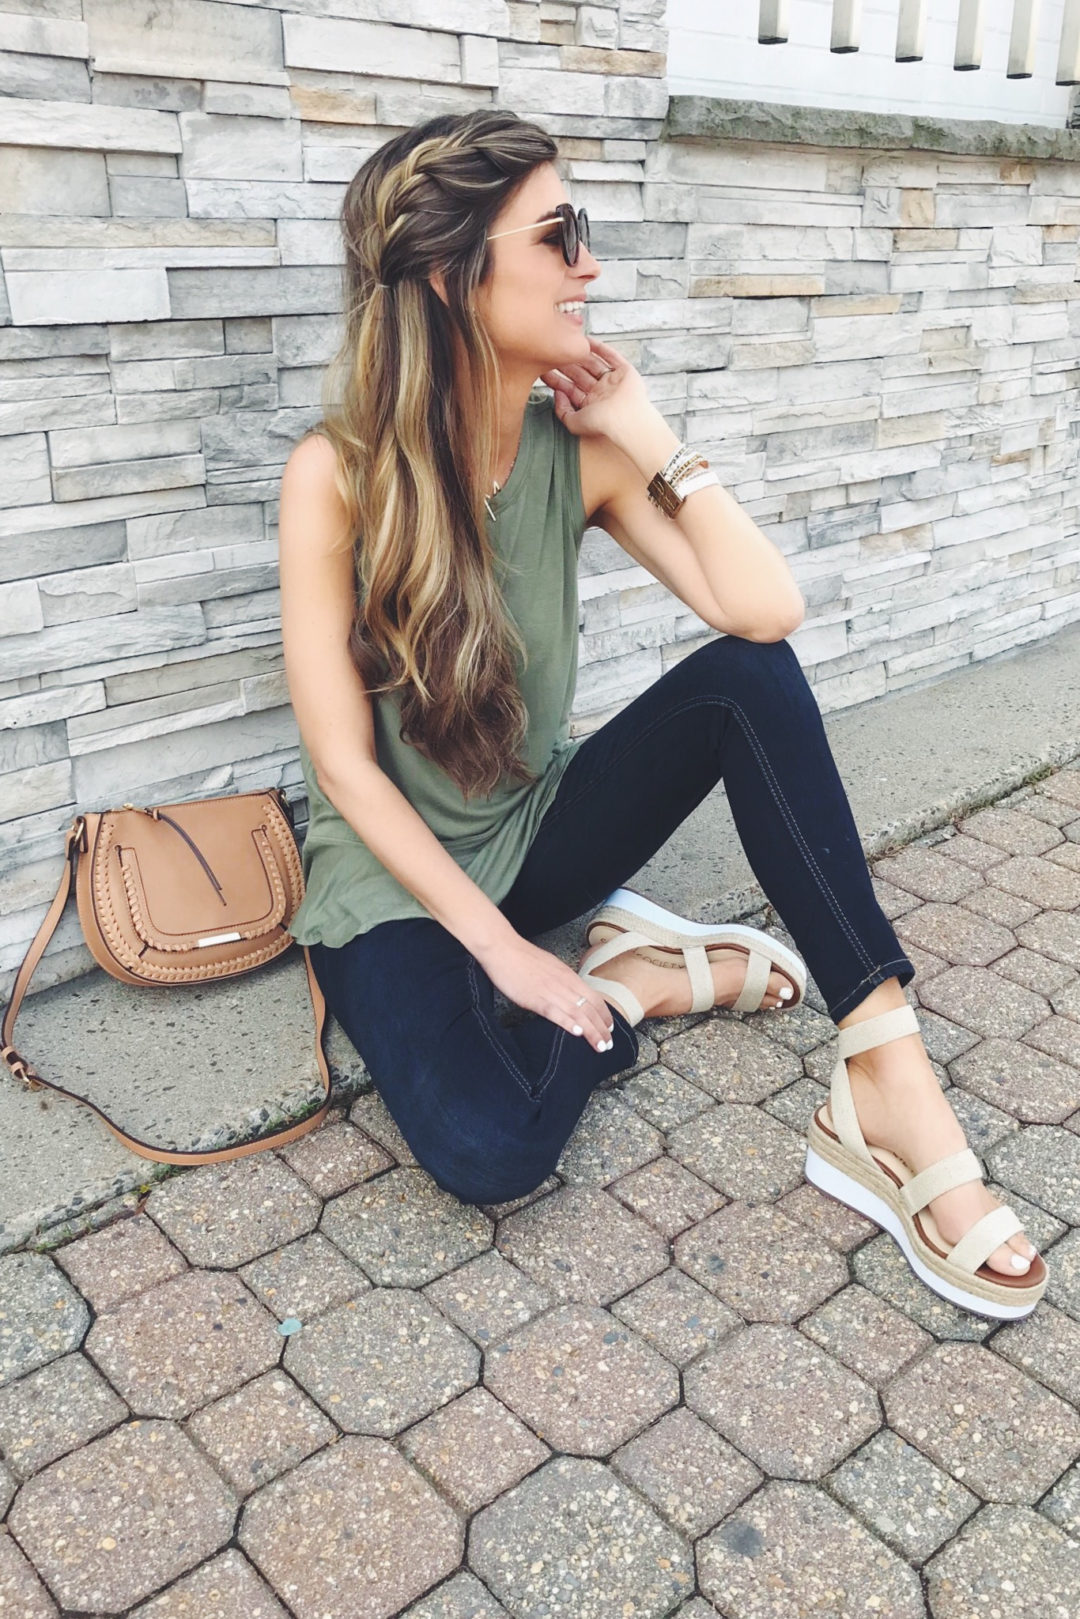 cute spring outfit - flatform sandals and loose side braid - pinteresting plans blog